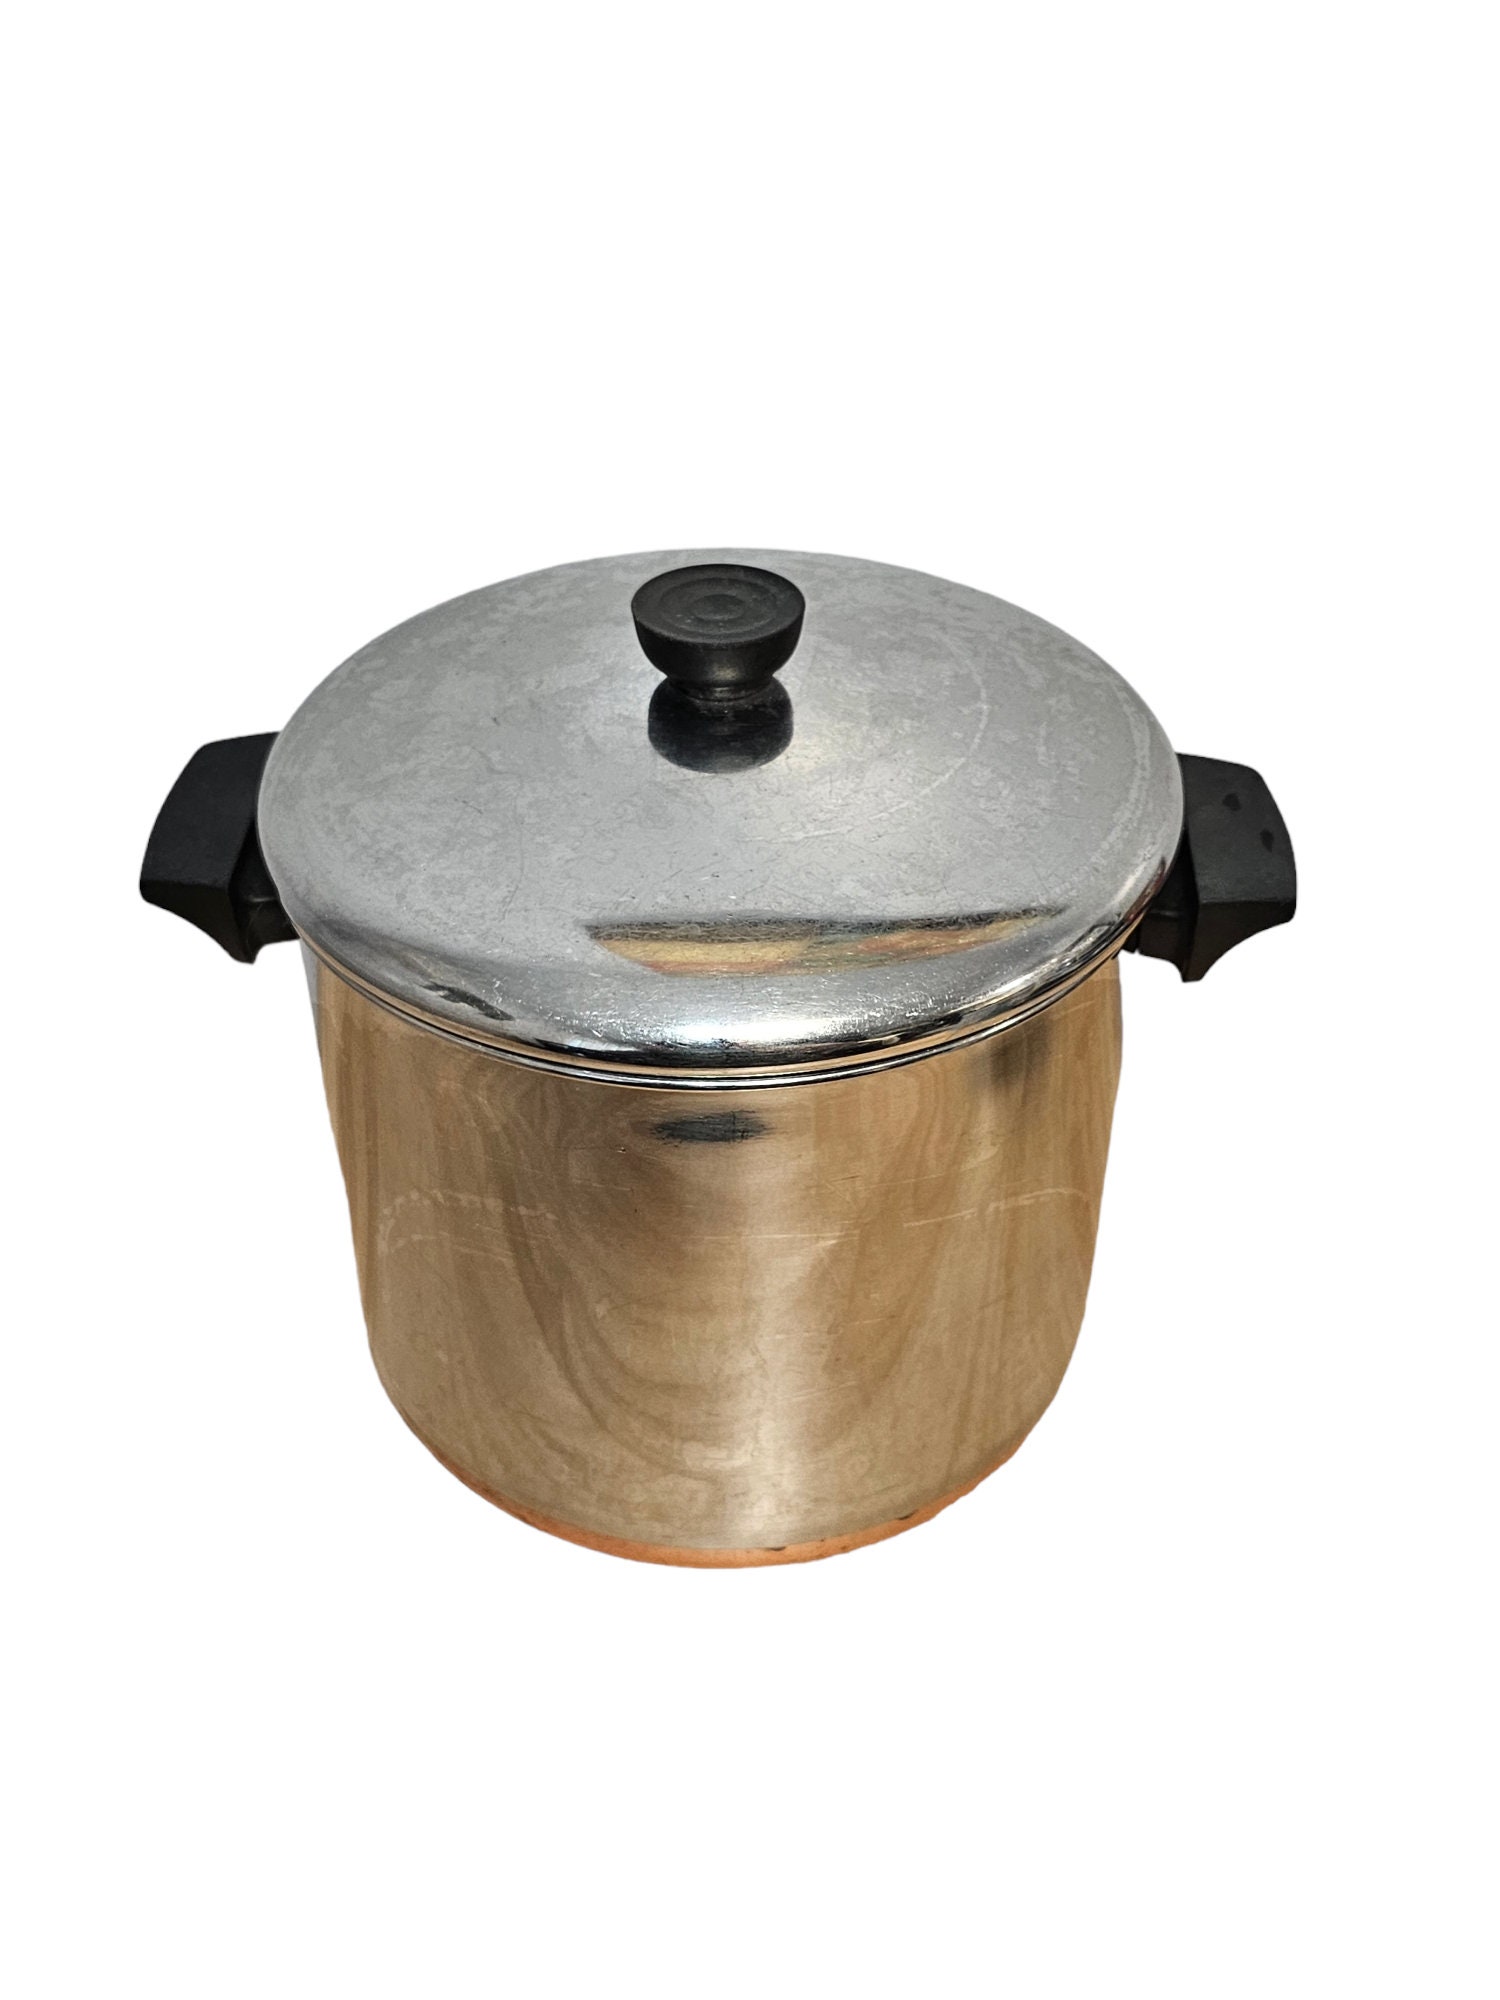 Revere Ware 3 Qt Copper Clad Stainless Sauce Pan Fry Pot Steamer Insert Lid  3pc